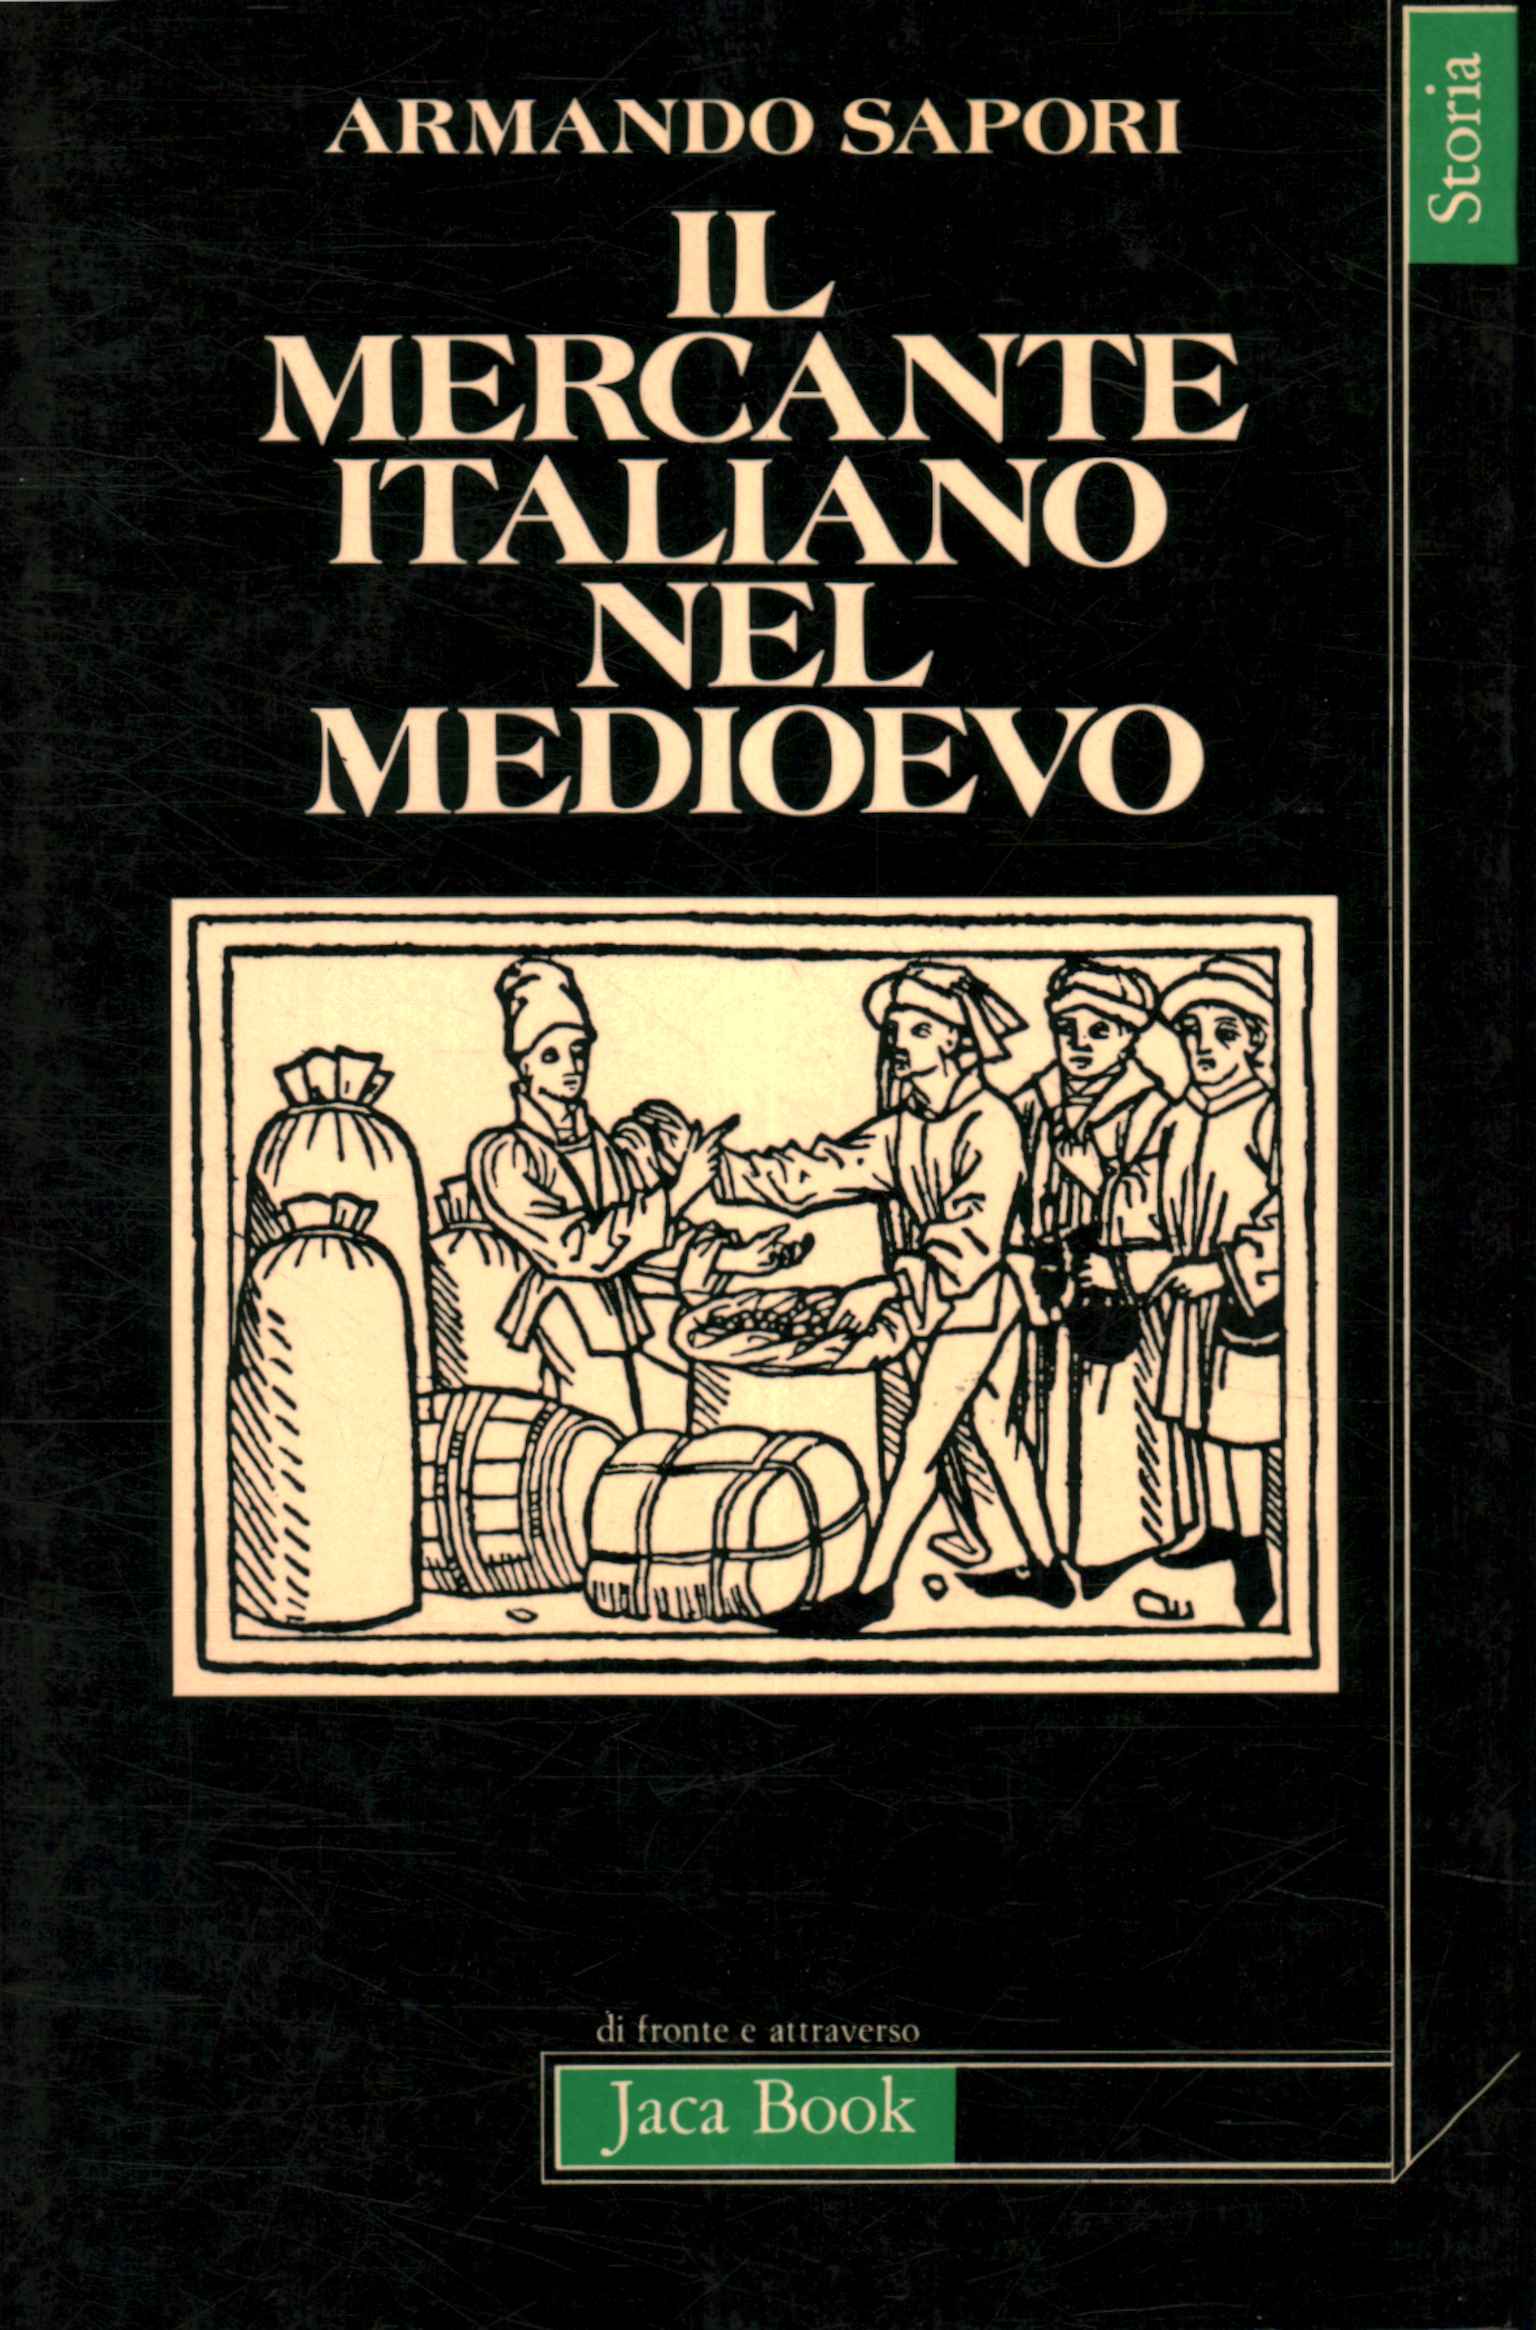 The Italian merchant in the Middle Ages